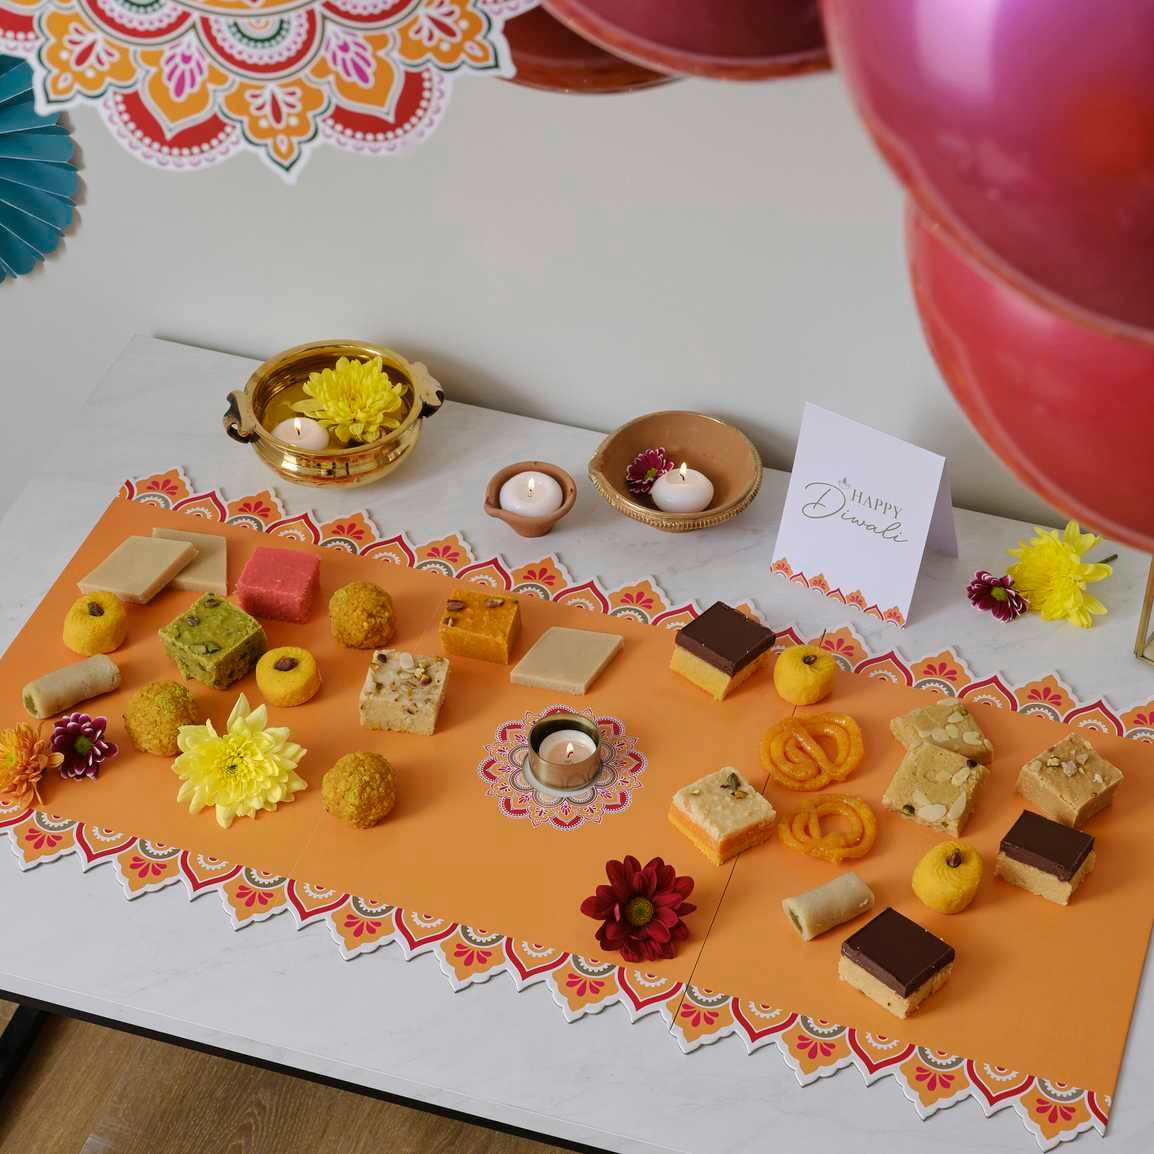 Table decoration with ornaments 1 x fold out Diwali grazing board measuring 394mm (H) x 800mm (W) and 1 x tent card measuring 280mm (H) x 110m (W).